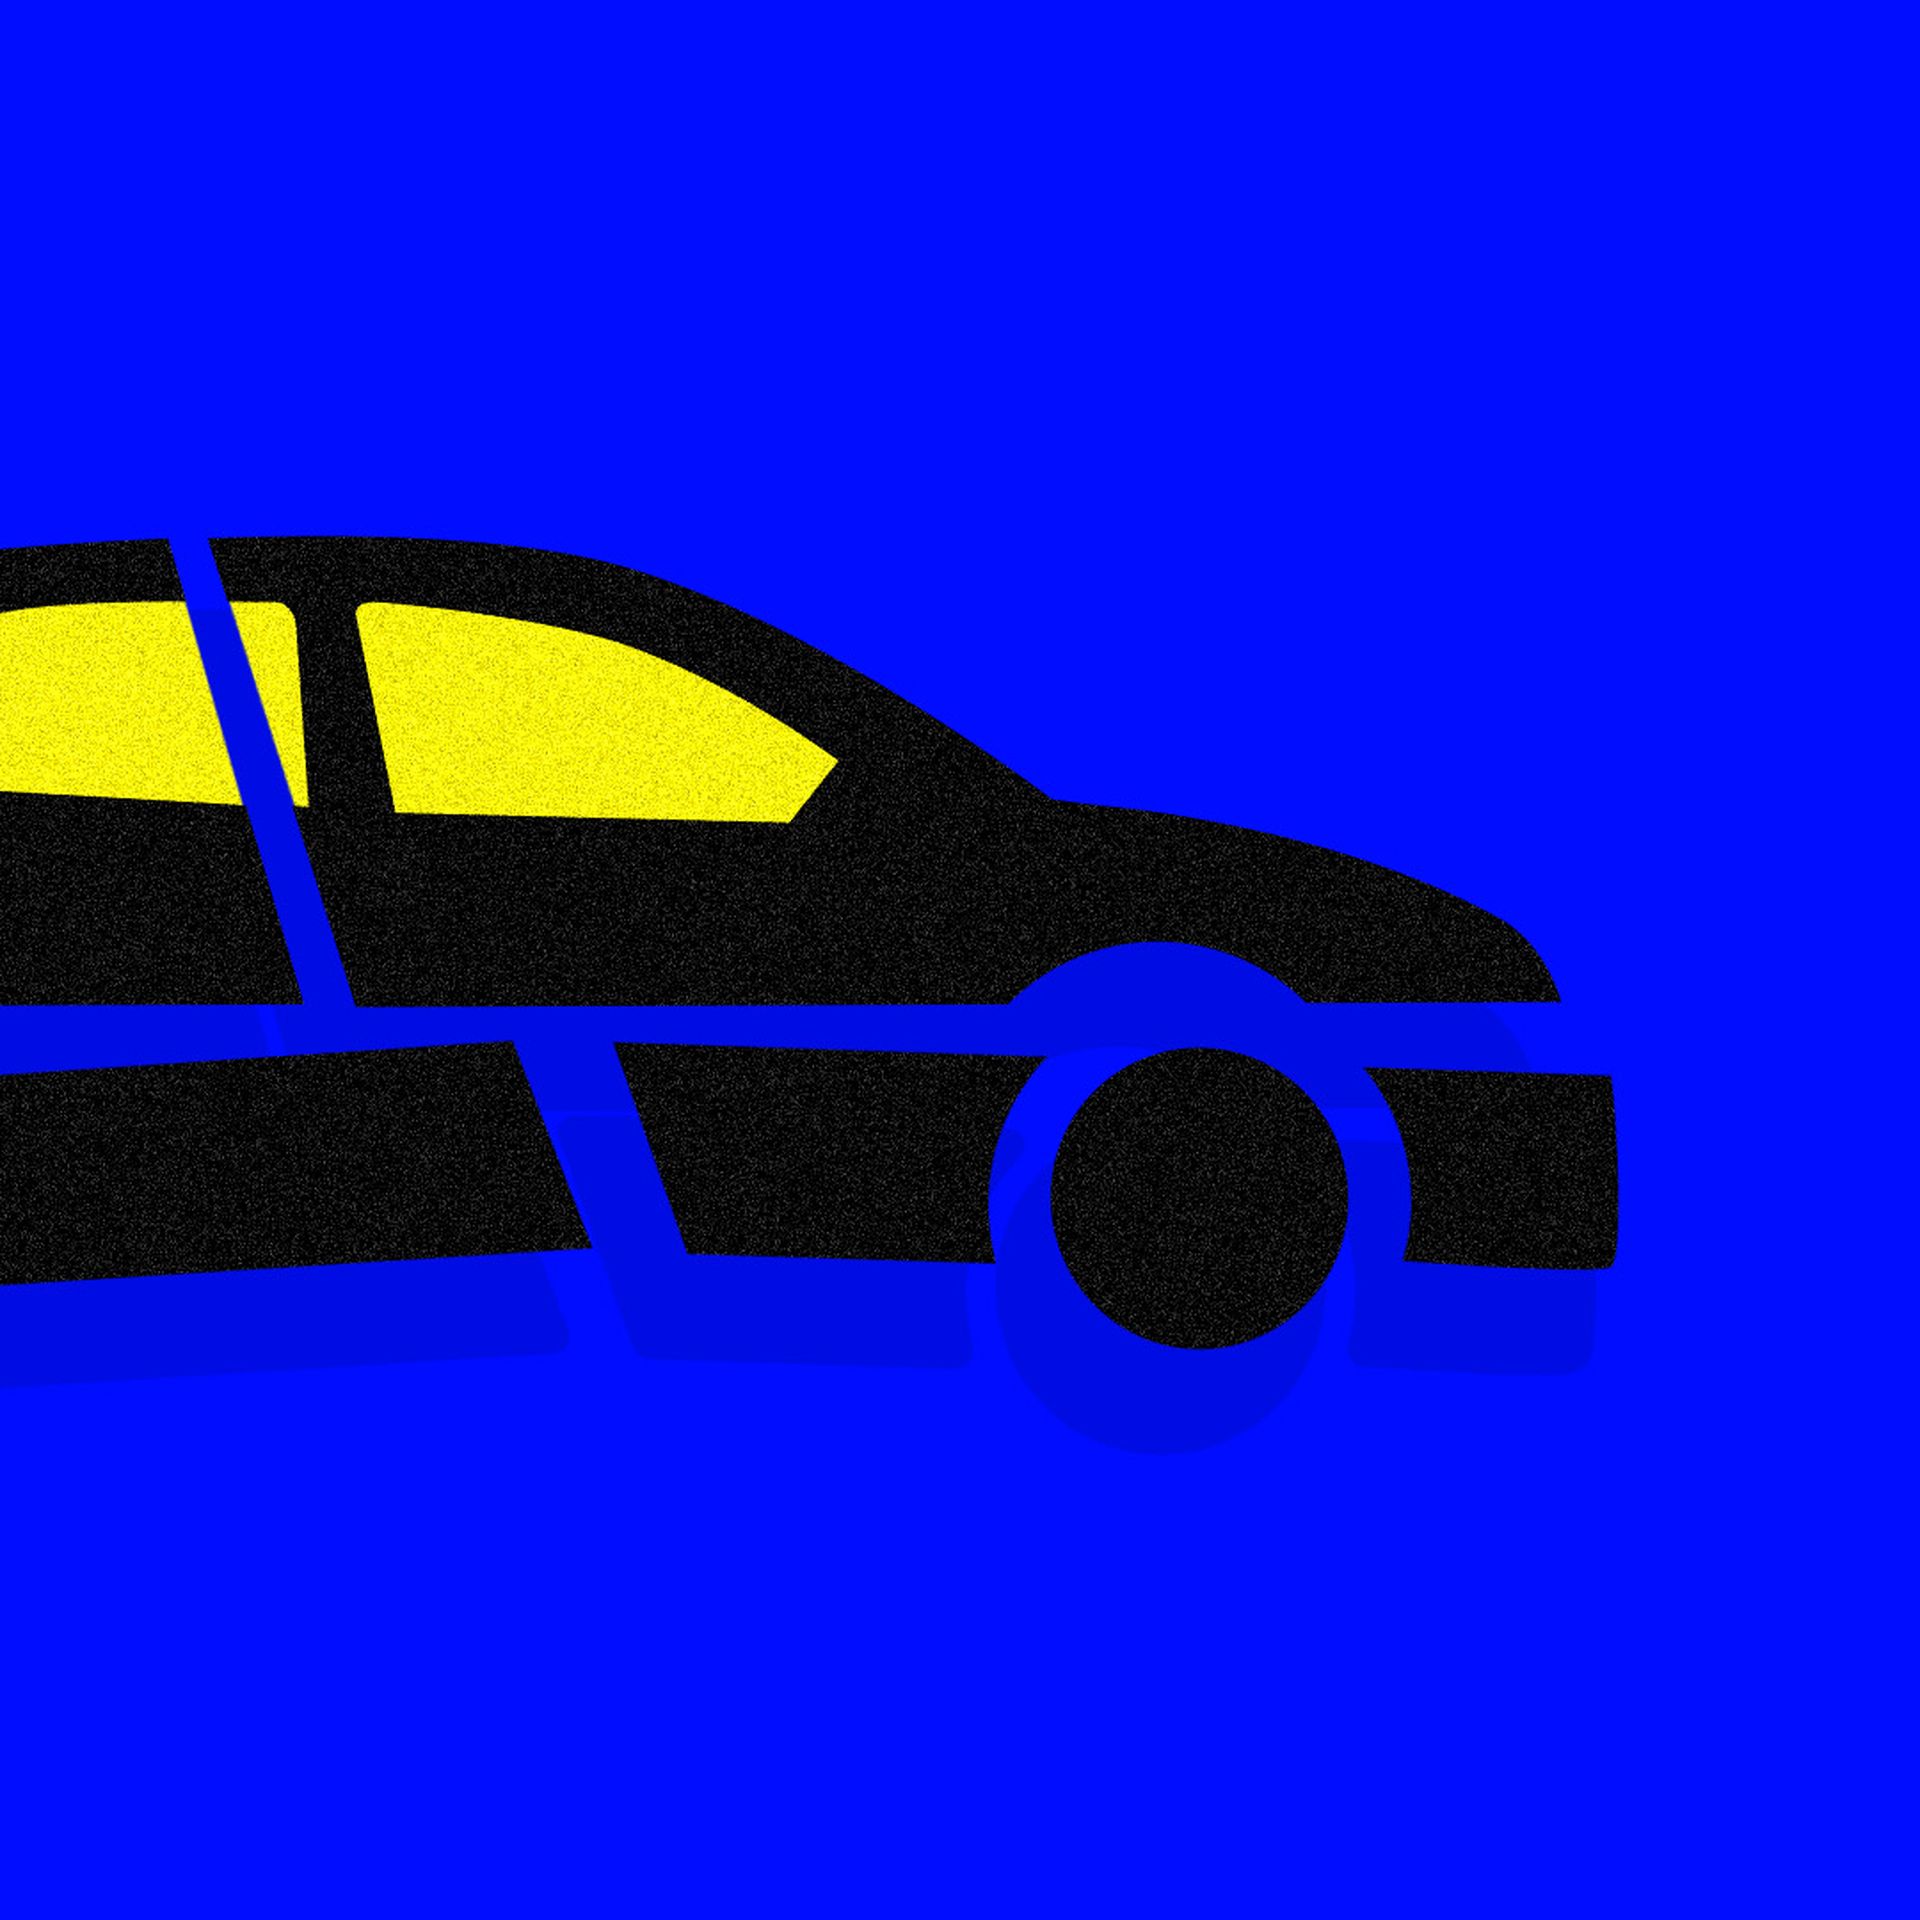 Illustration of a car cut up into pieces